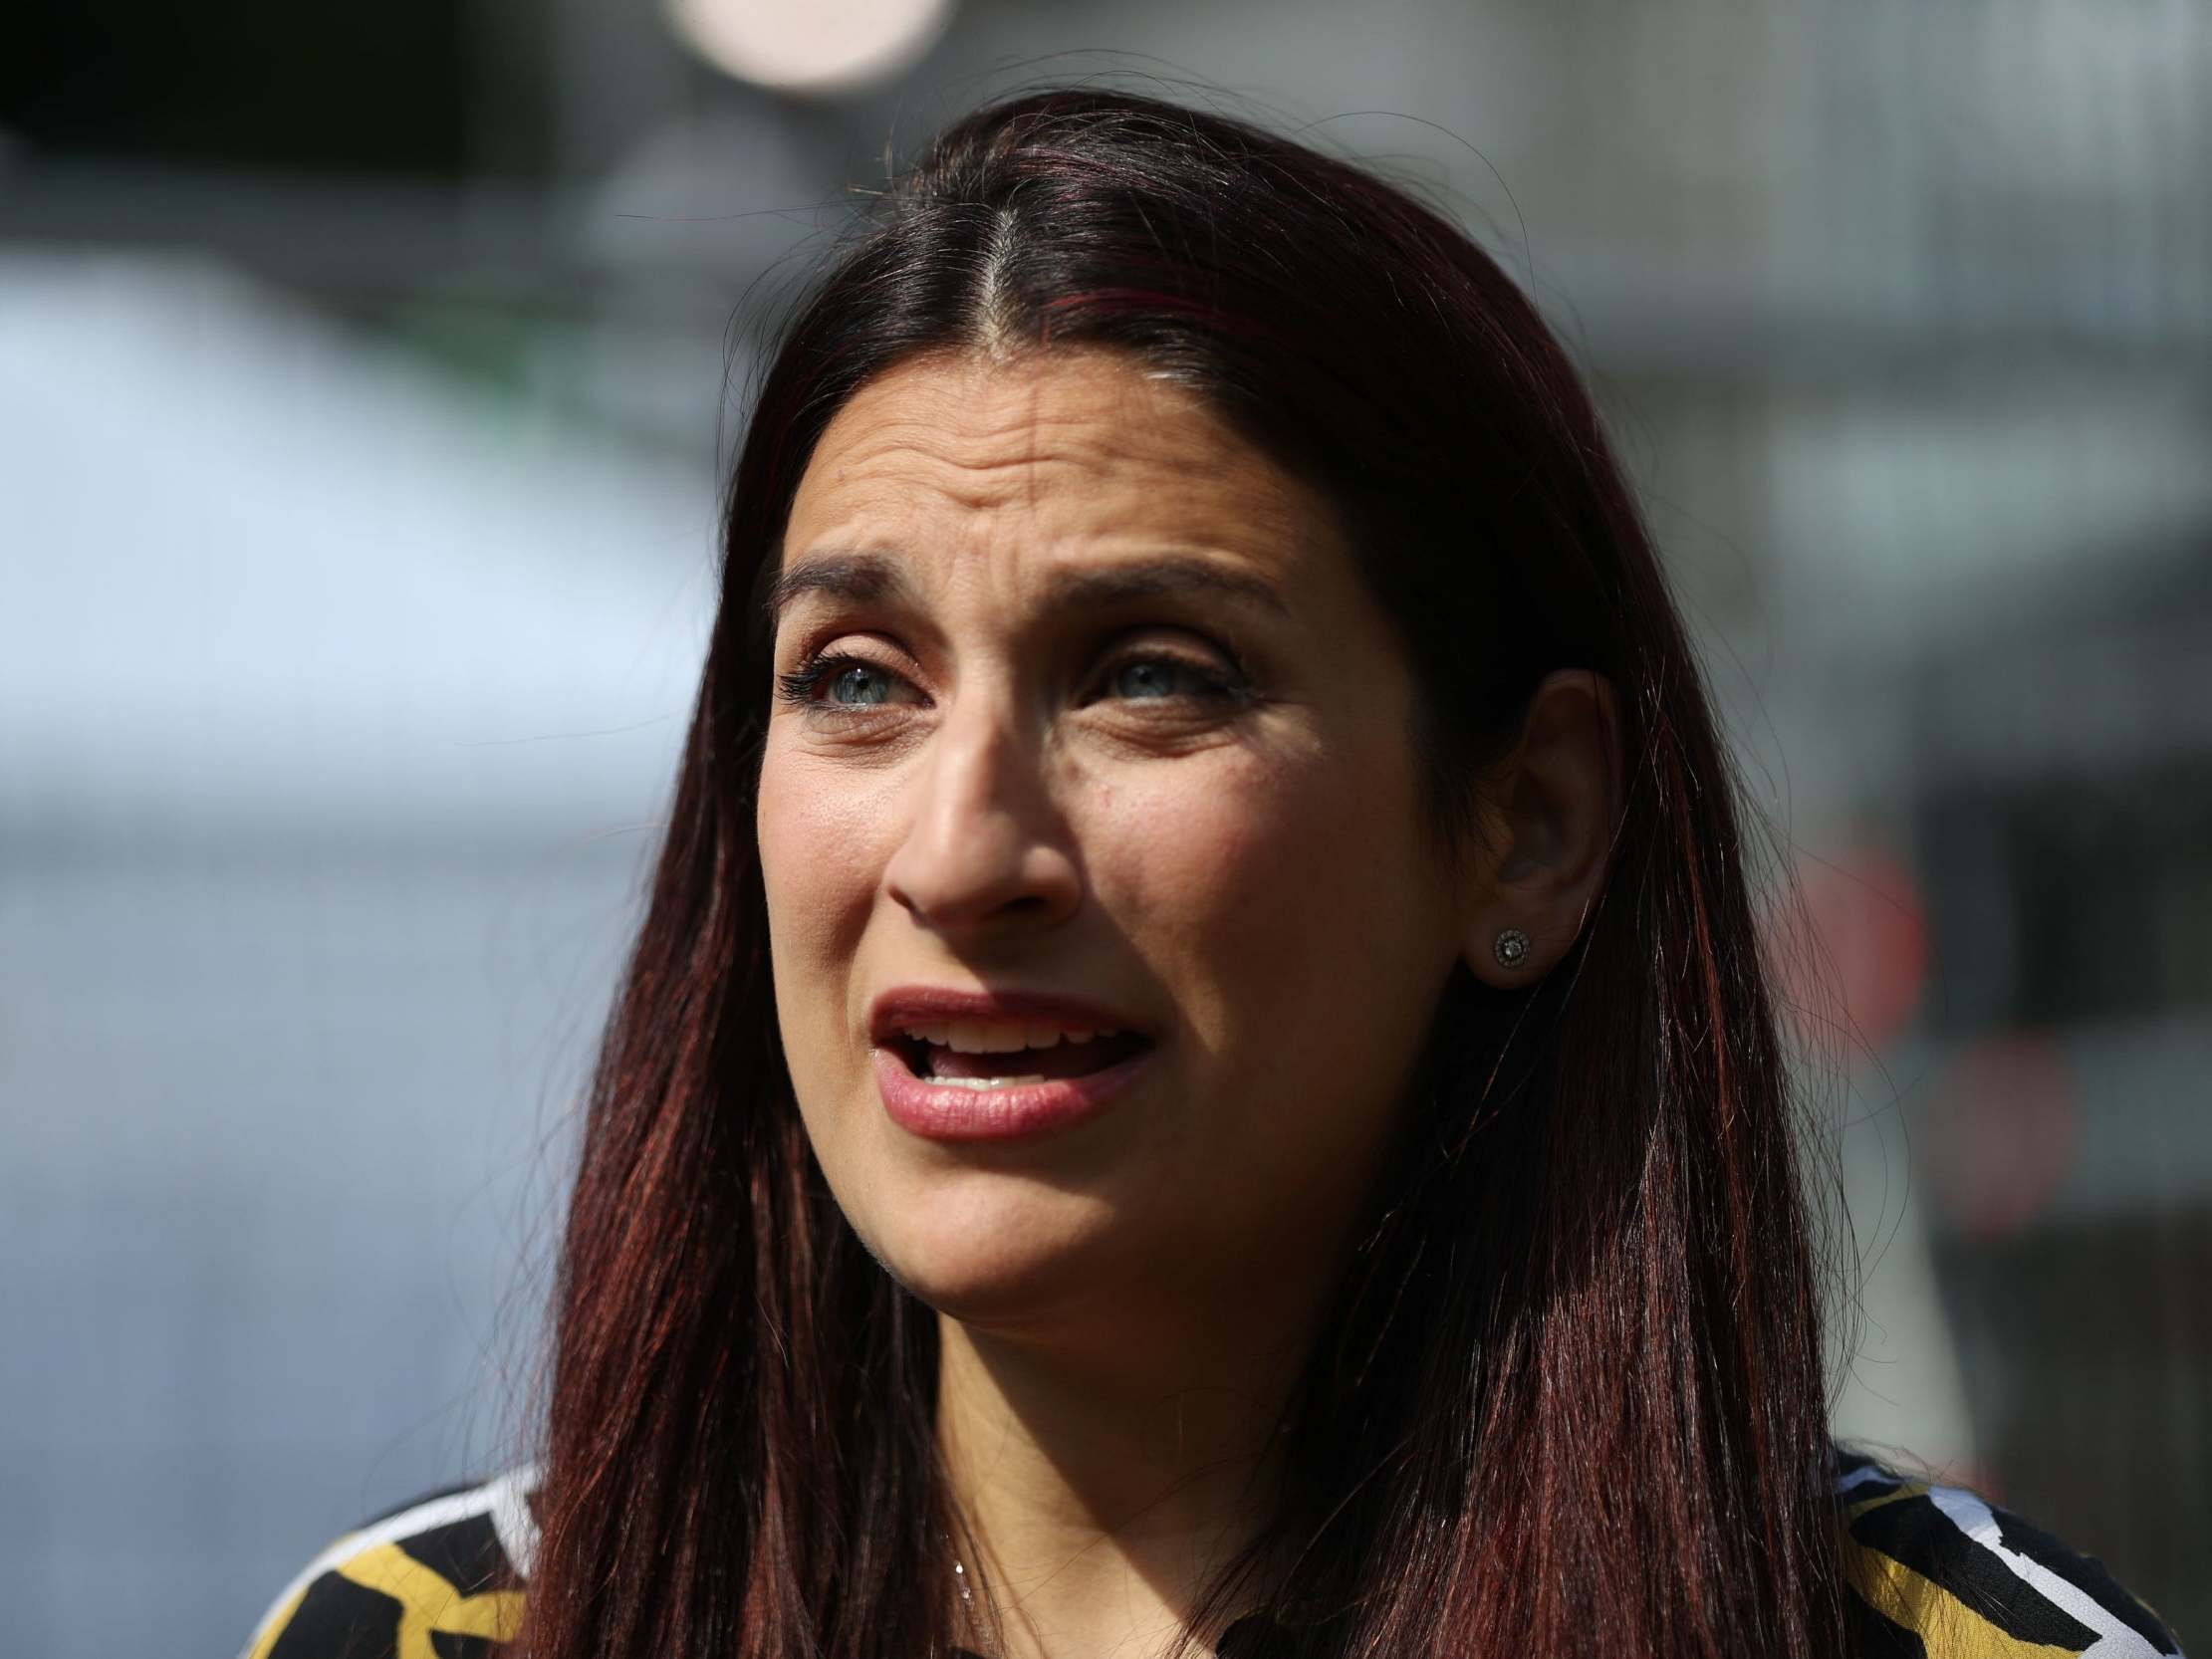 Lib Dem health spokeswoman Luciana Berger accused previous governments of turning a blind eye to maternal mental health as she unveiled the pledge